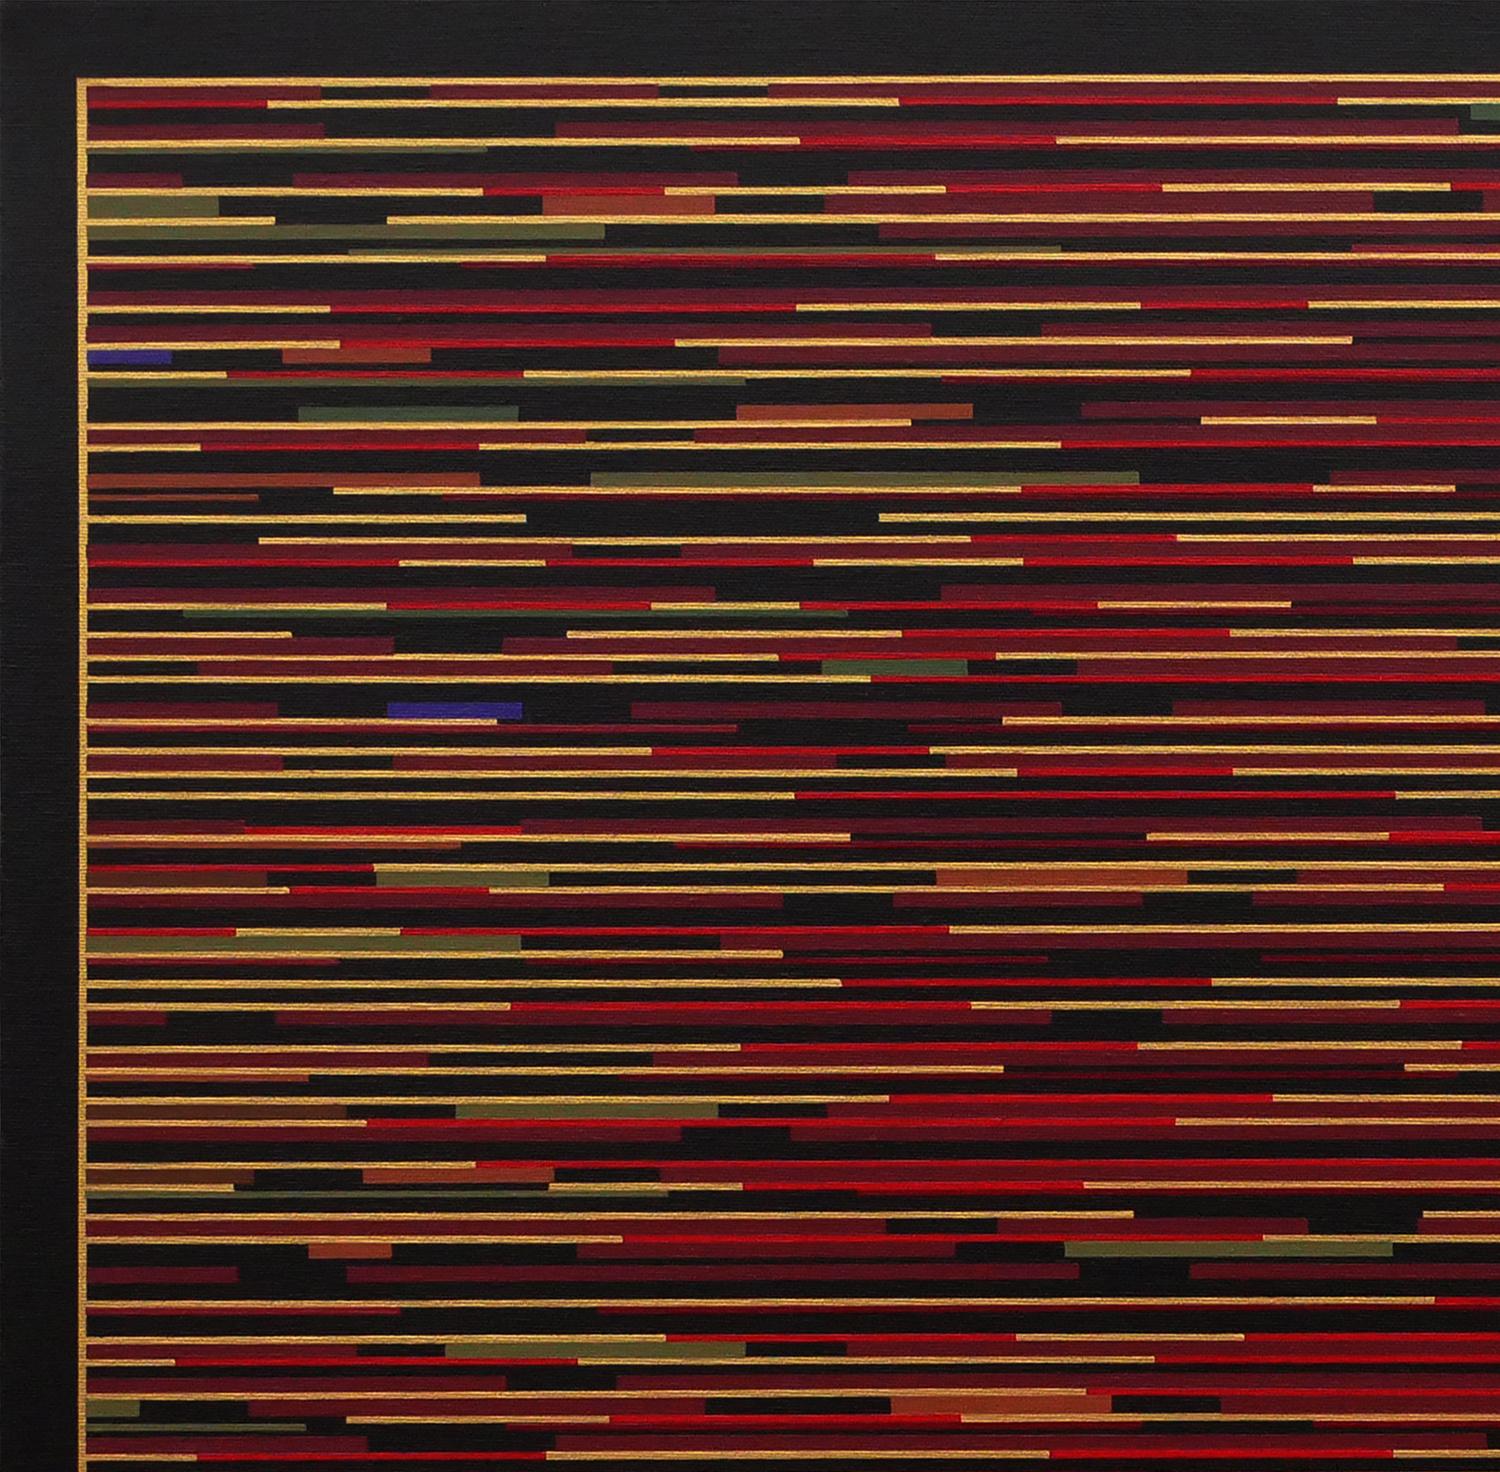 Contemporary abstract geometric painting by artist Mark Byckowski. The work is featured in a series of paintings. The work features horizontal lines with a variety of vivid colors of red, yellow, and some purple against a black background. Each work